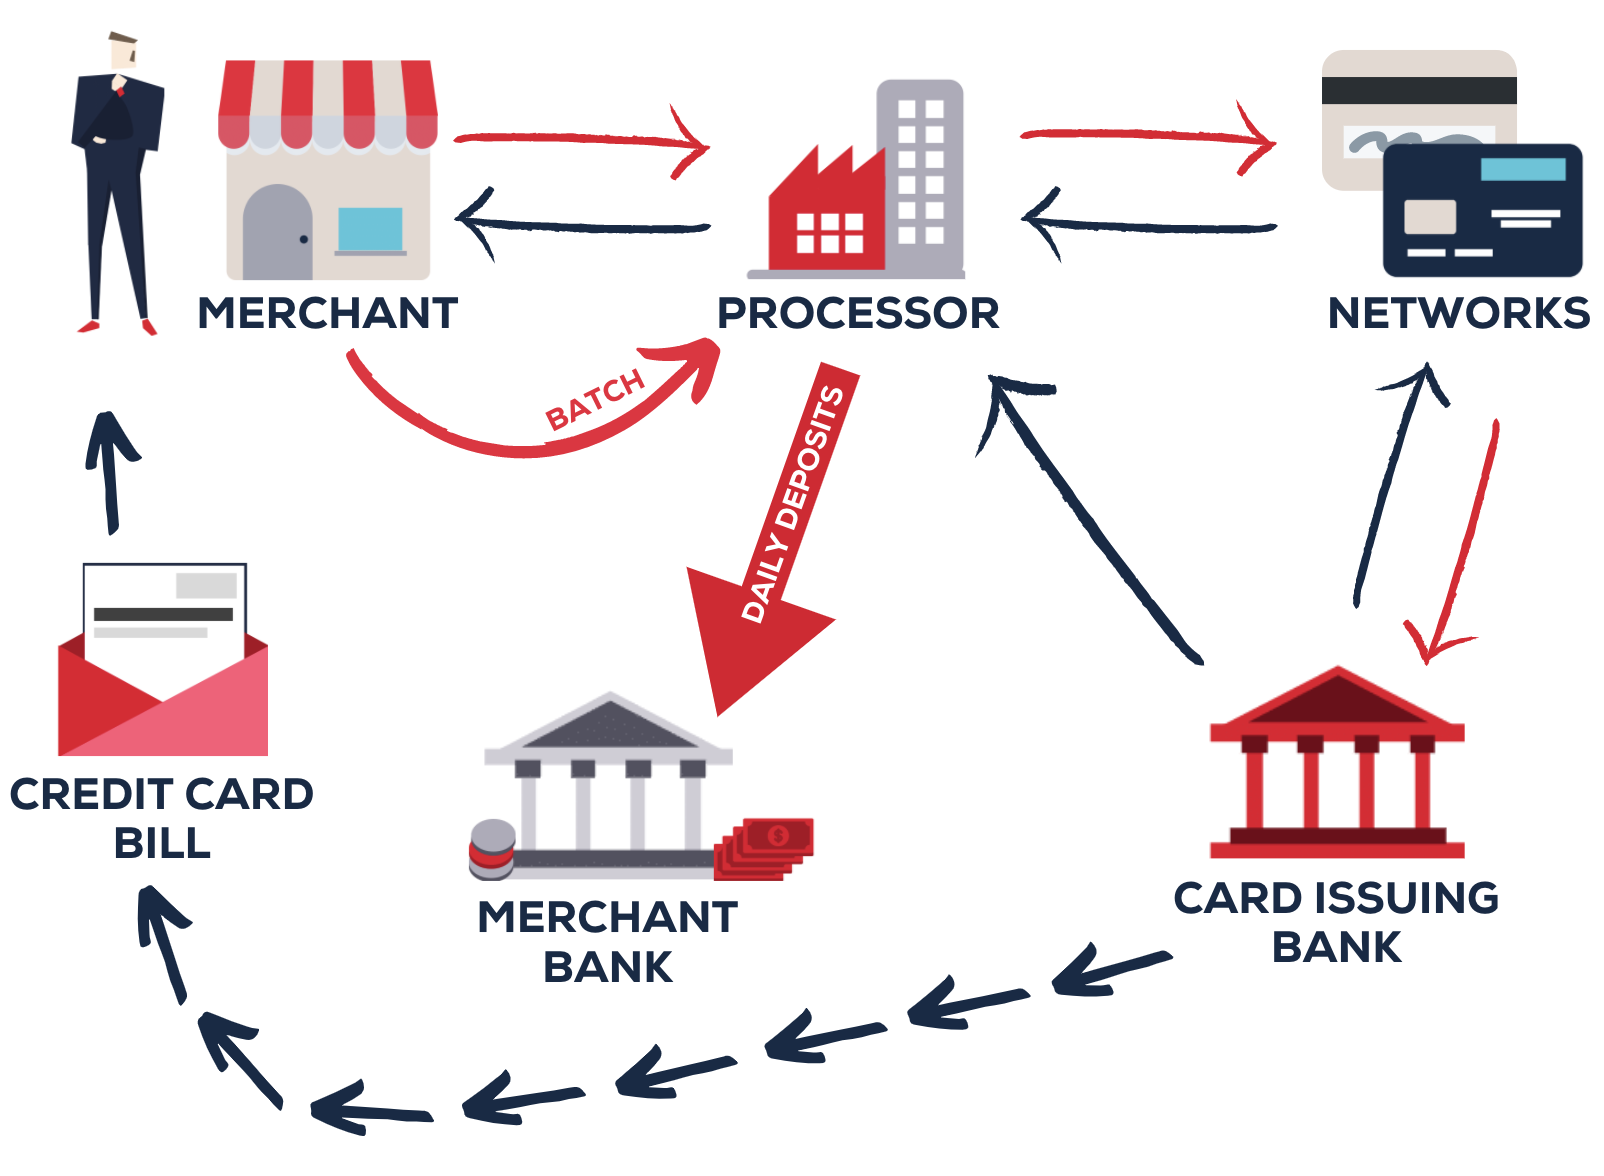 Map of payment card ecosystem